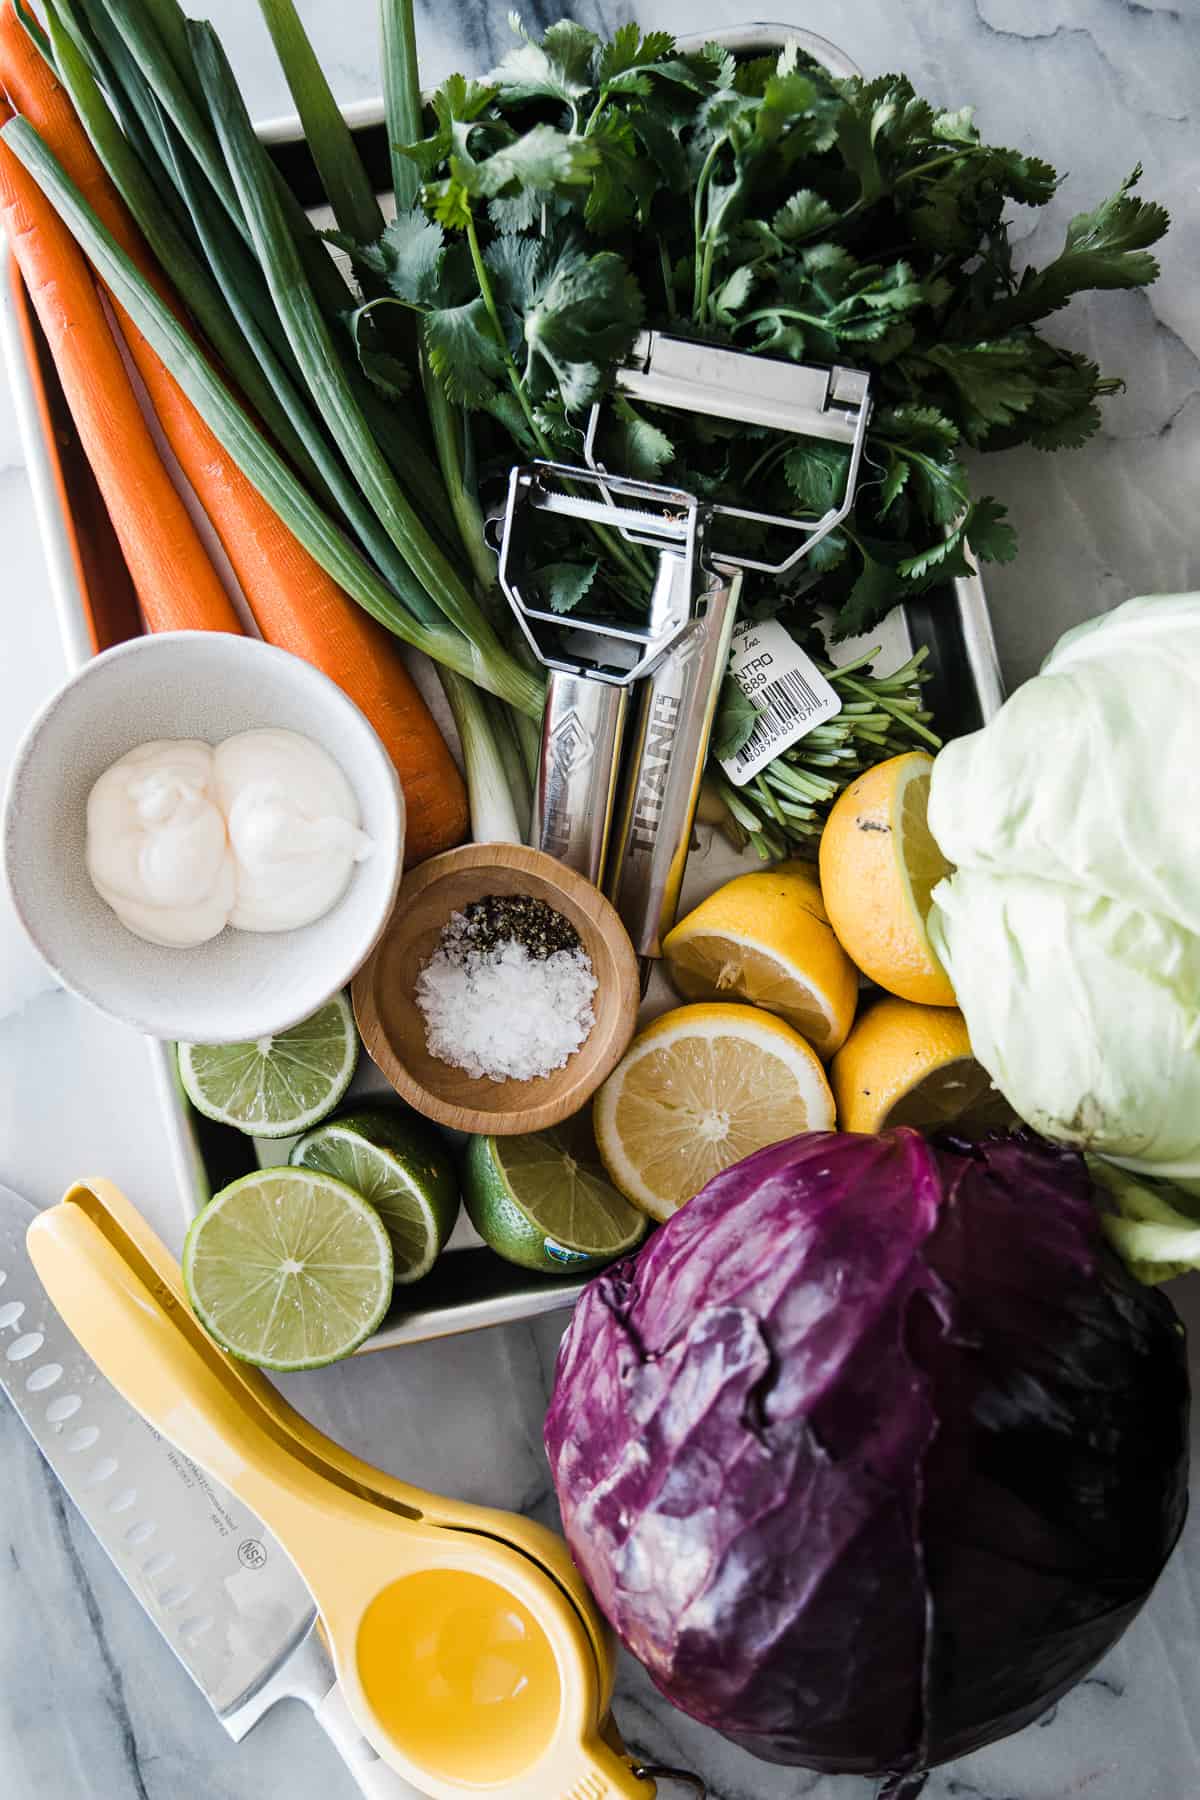 ingredients for slaw on a tray